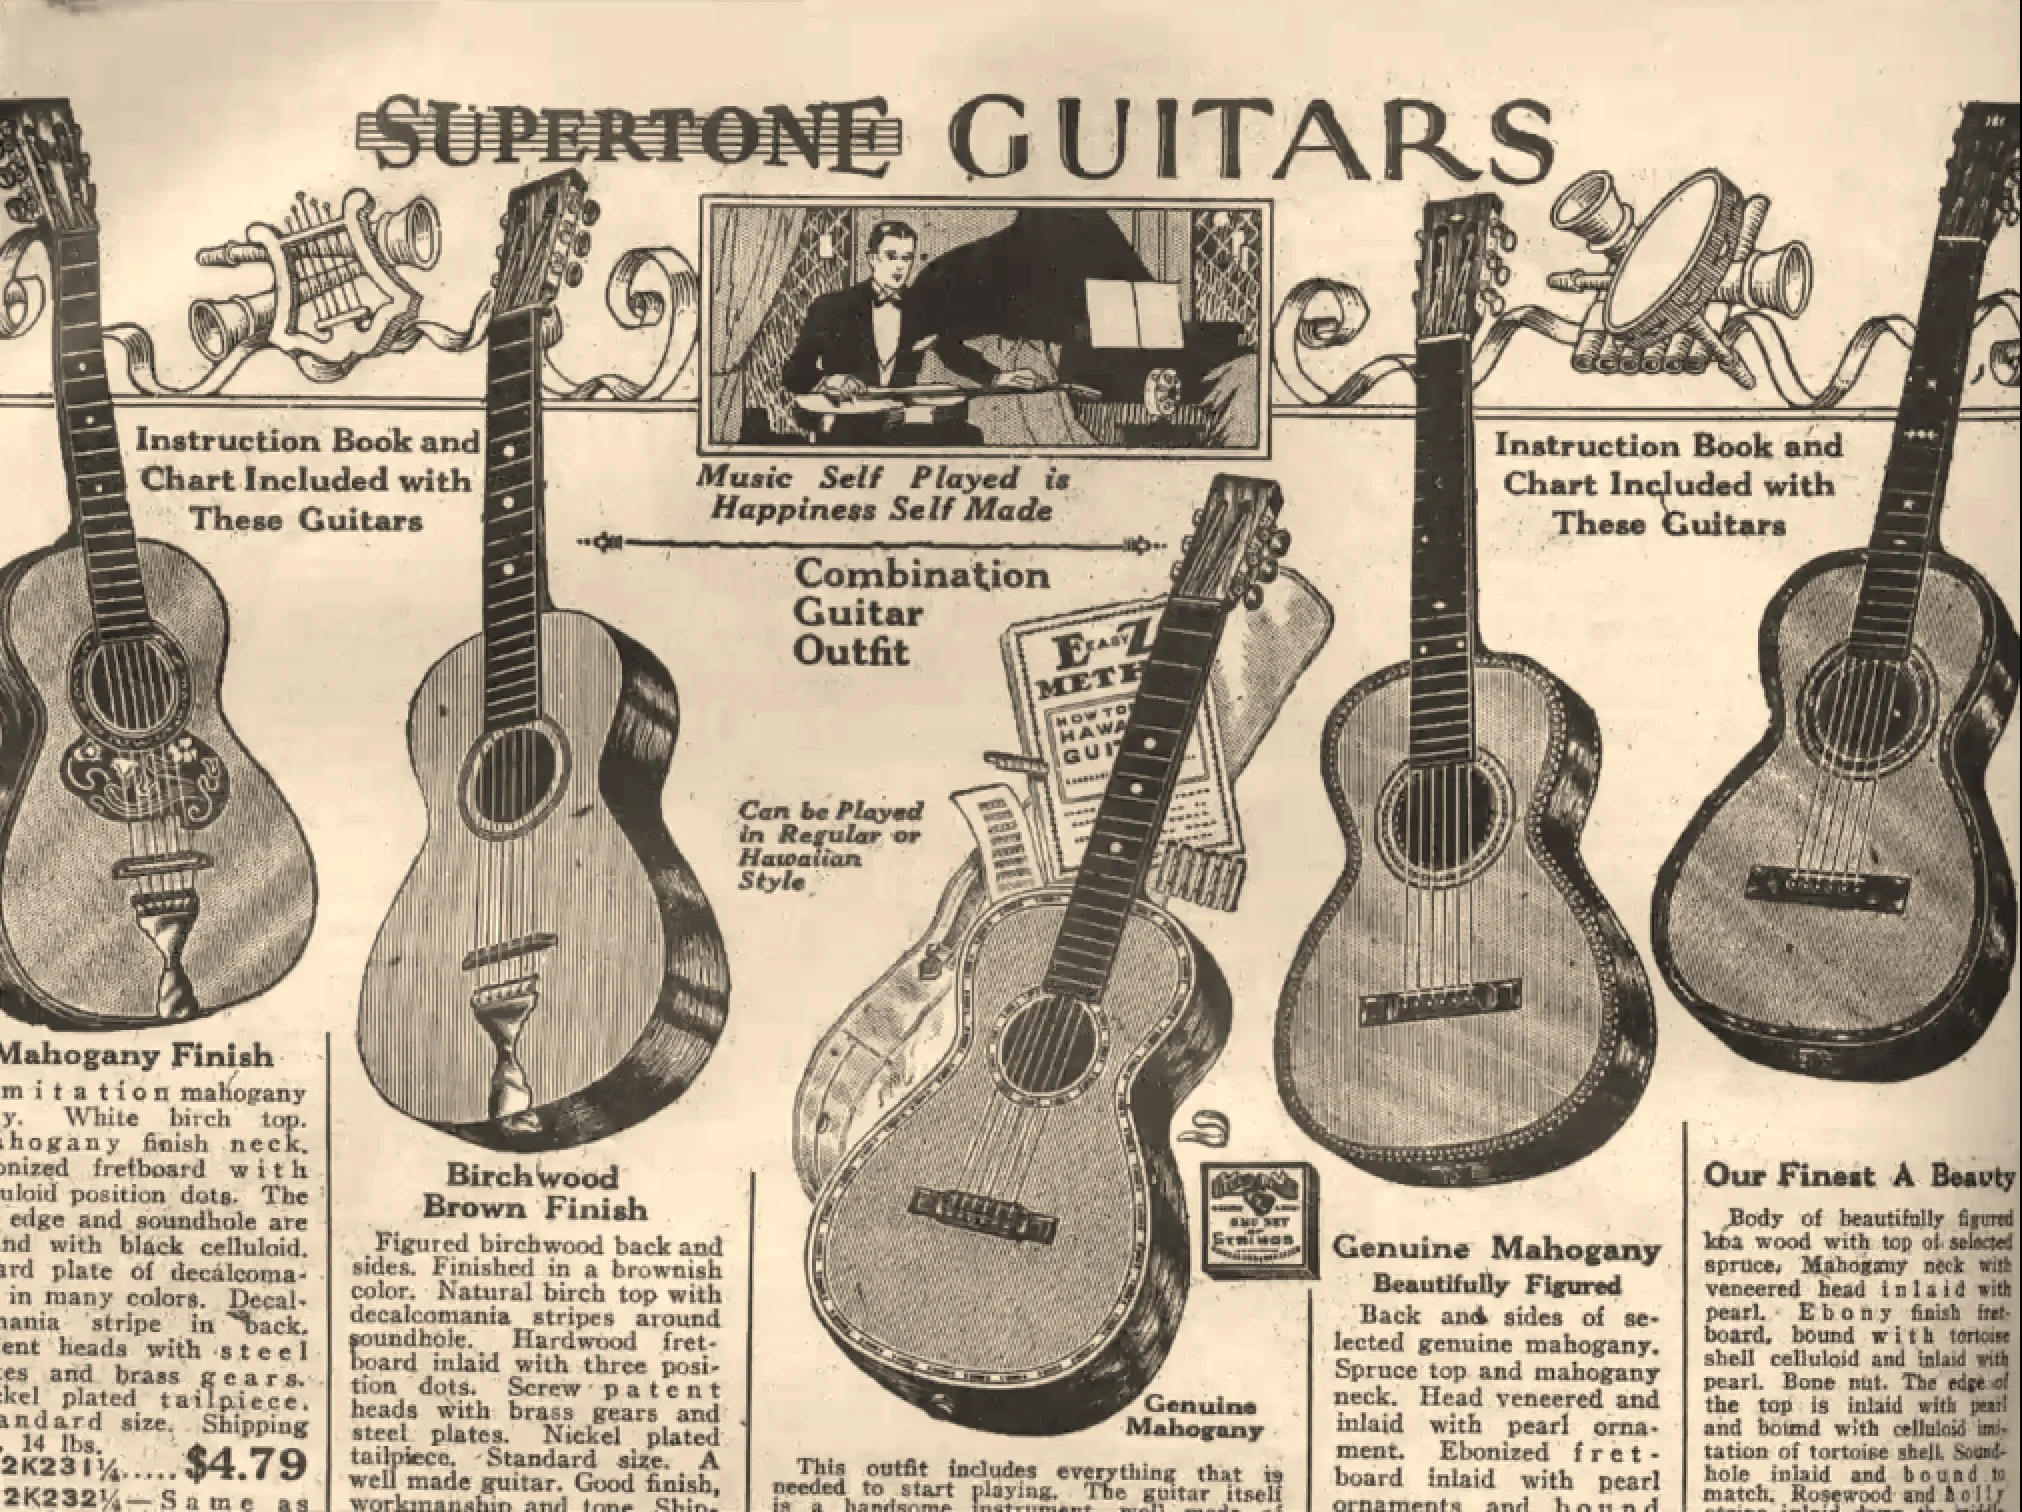 From The Vault: The 1927 Sears, Roebuck Catalogue - The Birthplace of  Country Music